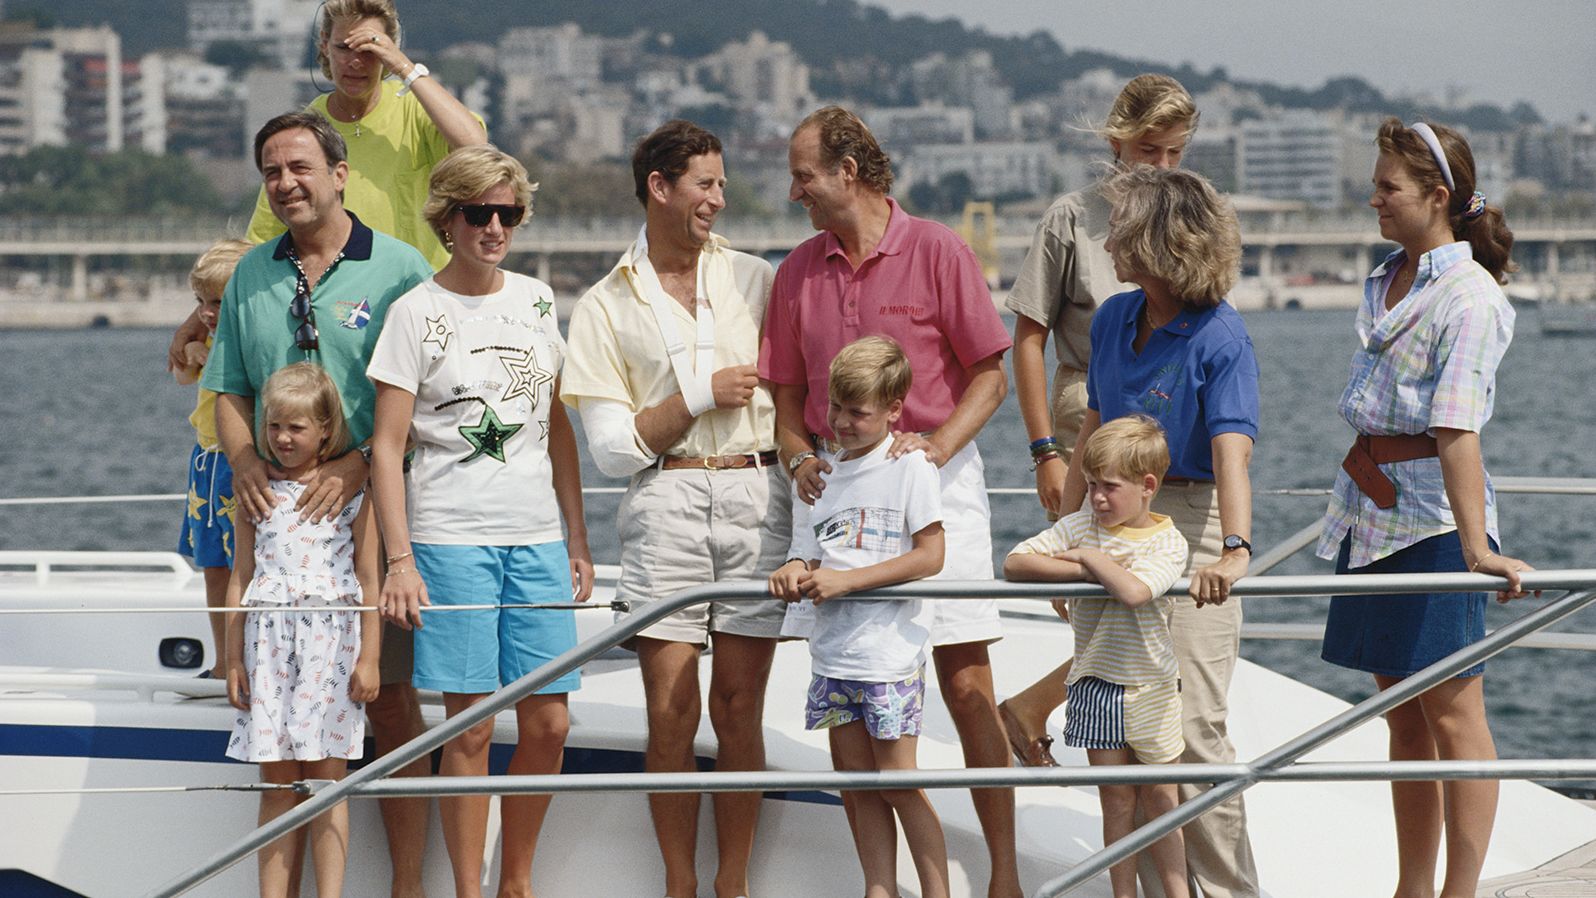 Diana and Prince Charles enjoy a summer holiday in Majorca on board King Juan Carlos of Spain's yacht in 1990.